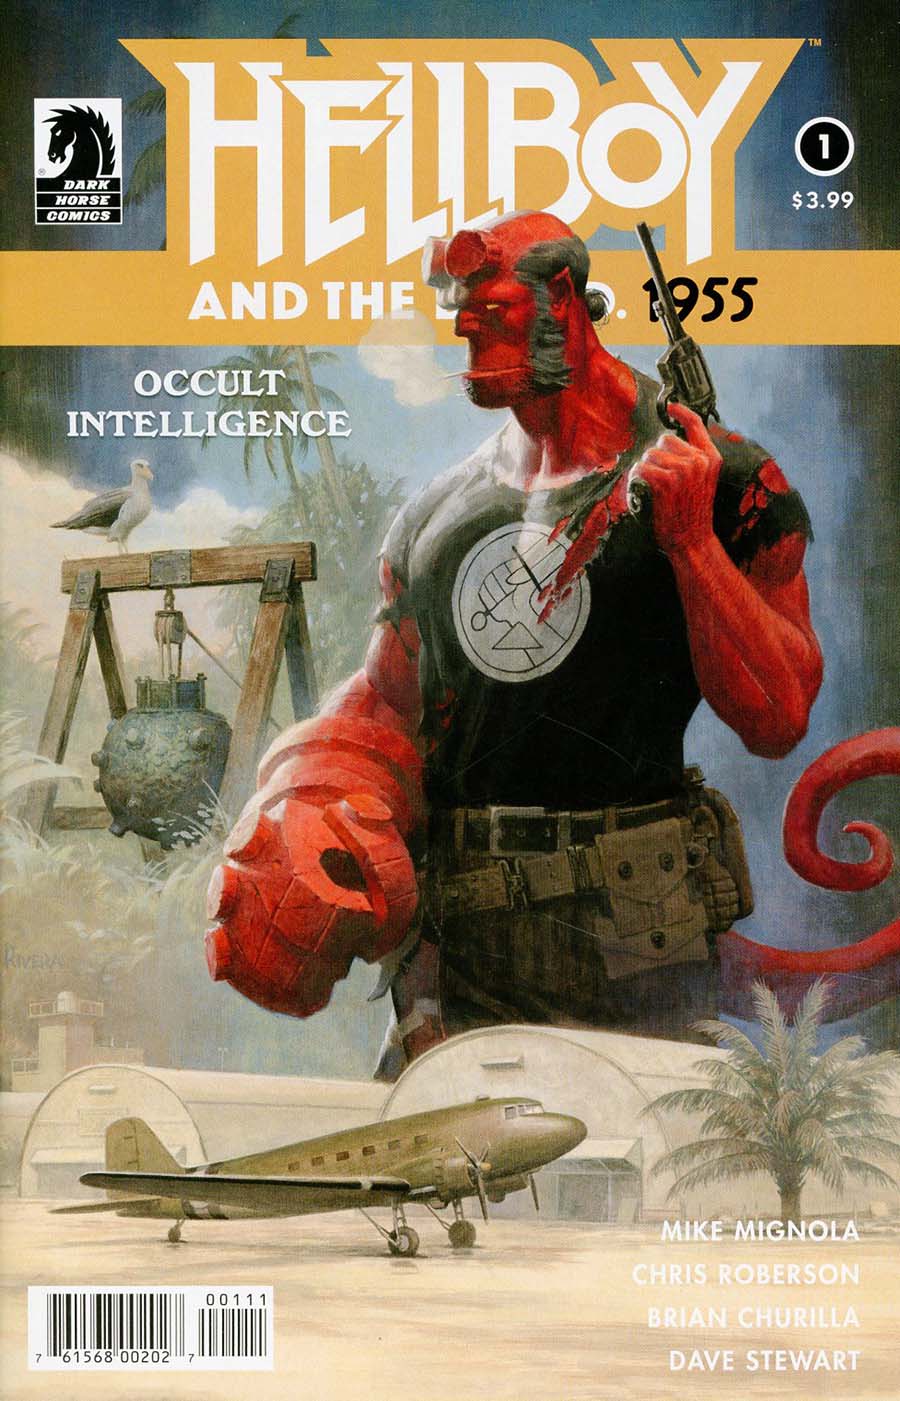 Hellboy And The BPRD 1955 Occult Intelligence #1